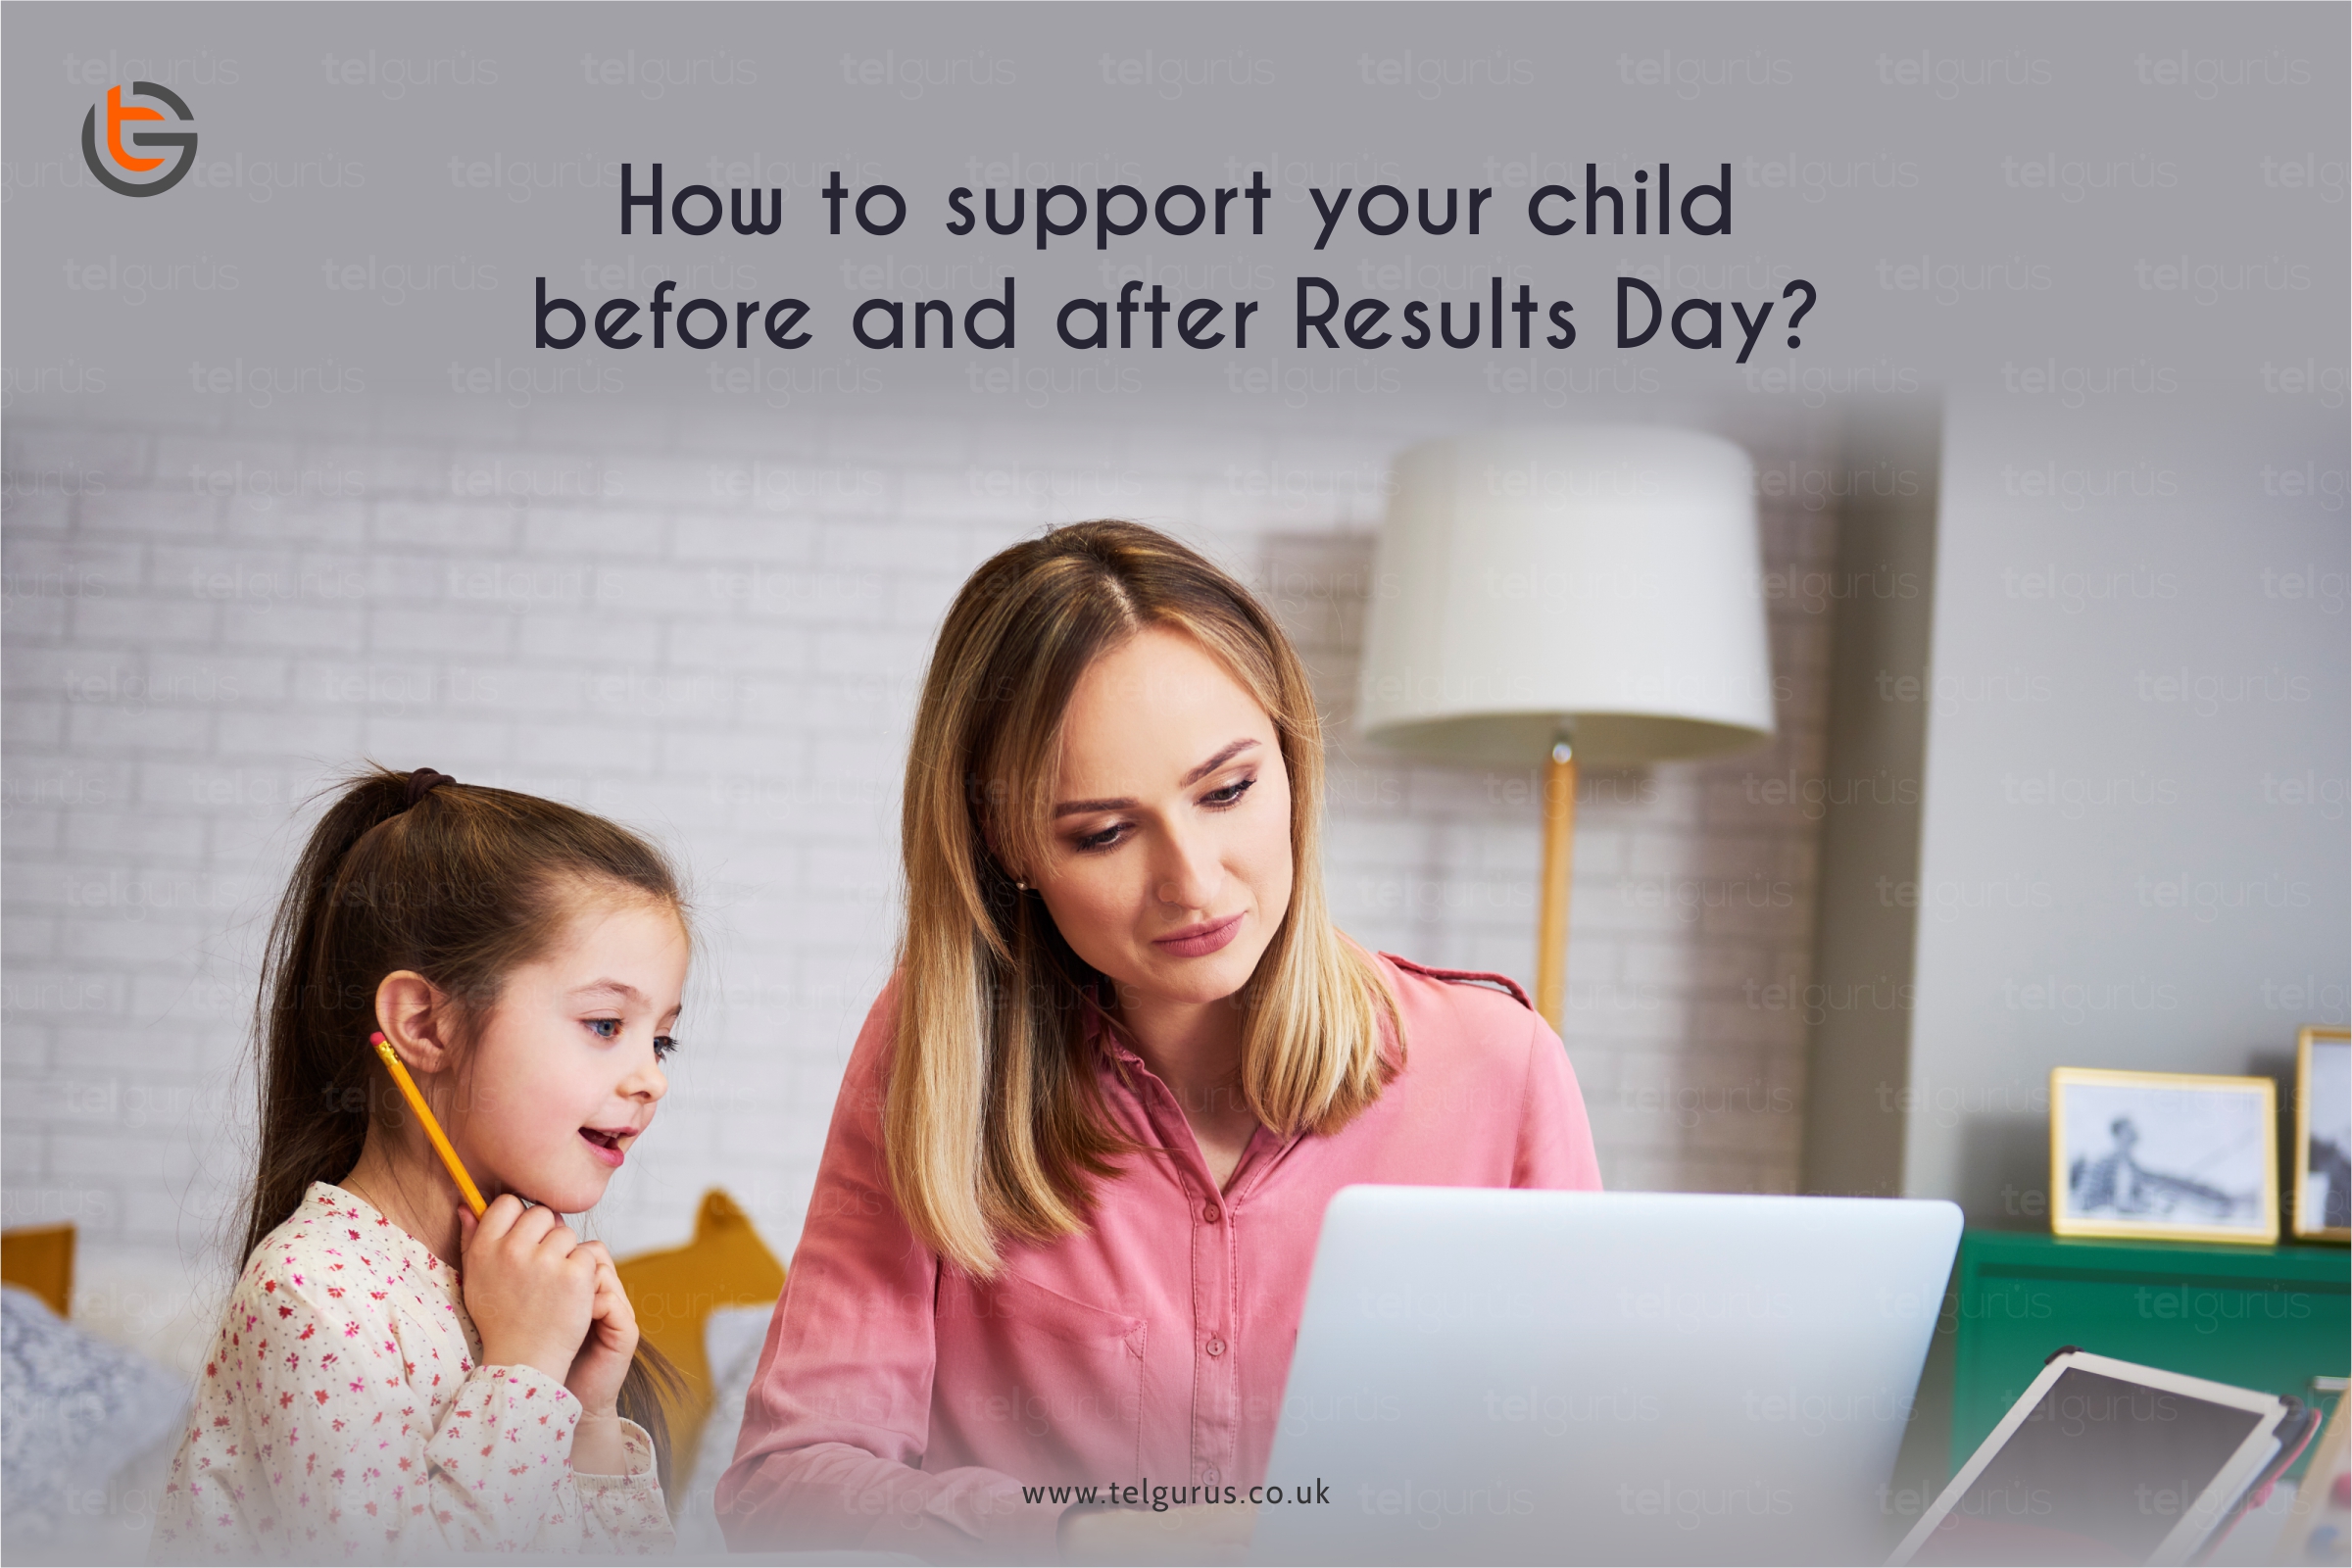 How to support your child before and after Results Day?